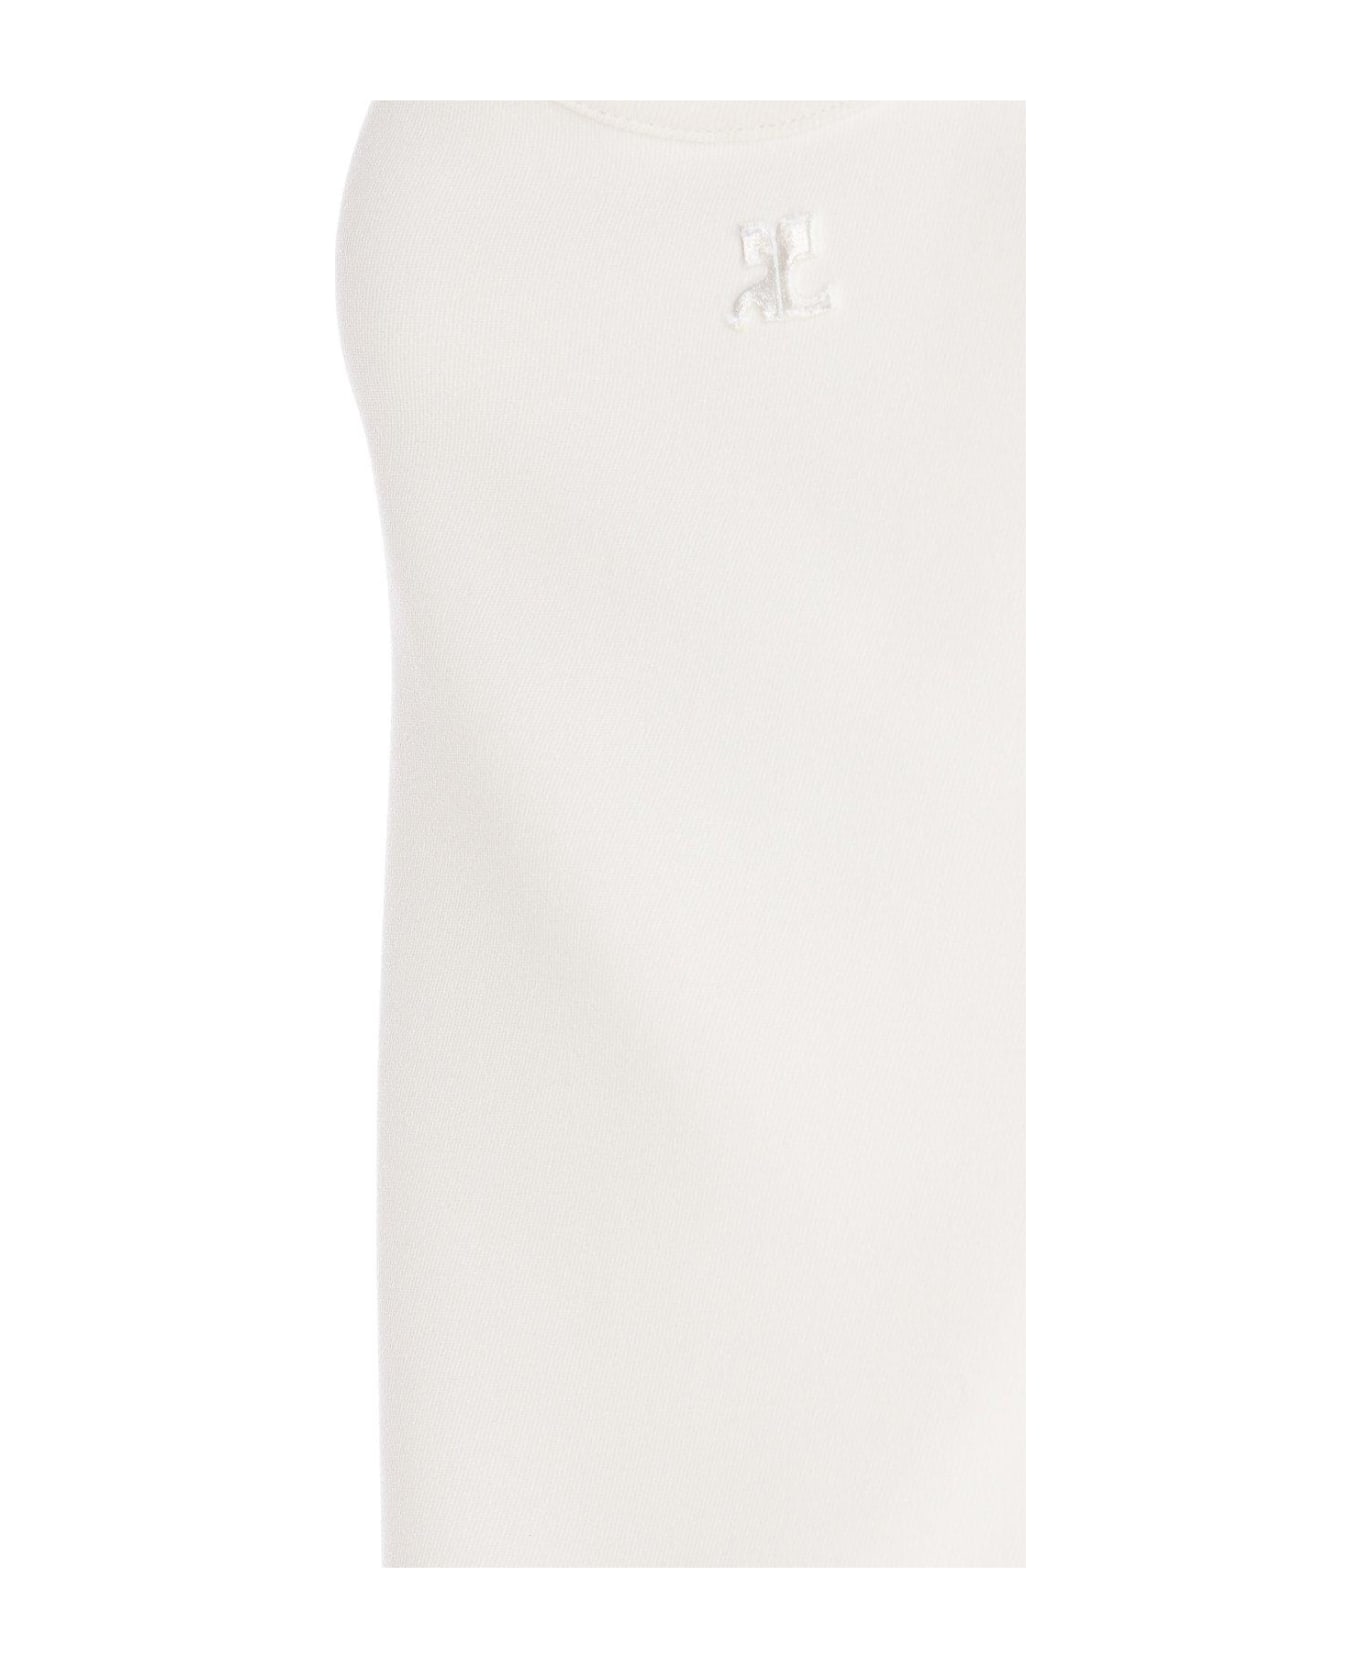 Courrèges Buckle Babydoll Twill Dress - White タンクトップ